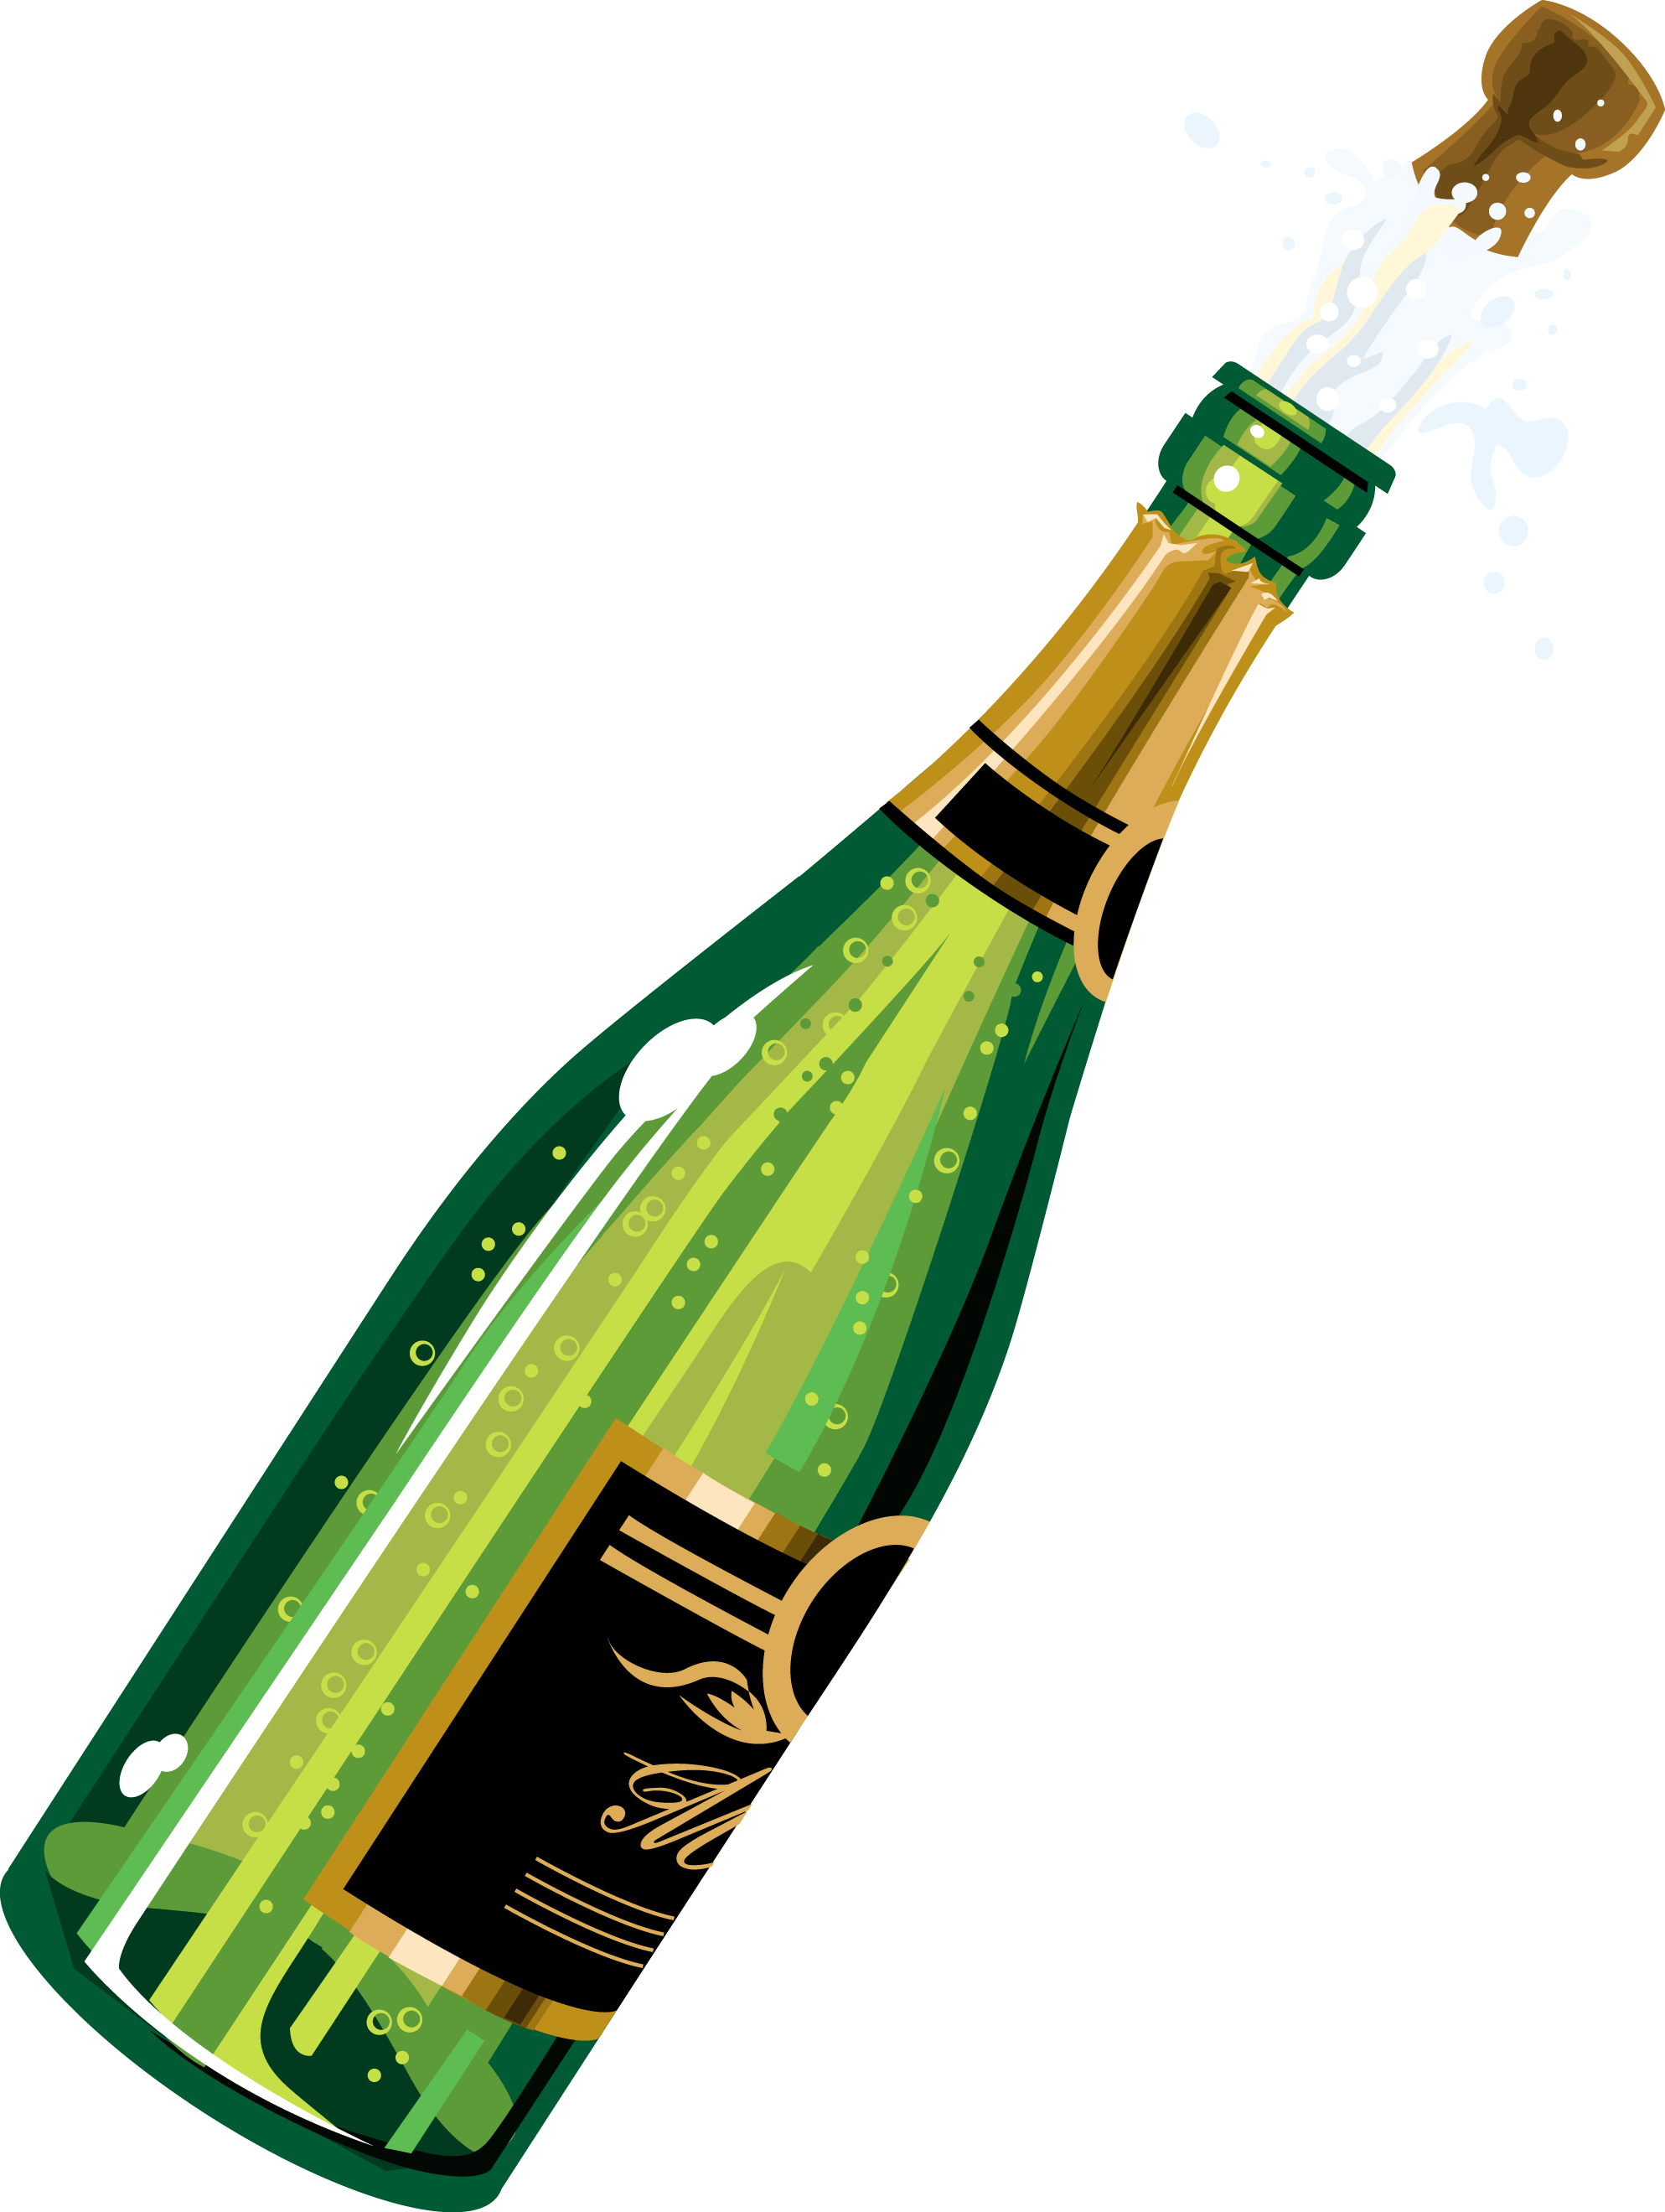 Champagne bottle clipart free download clip art gif